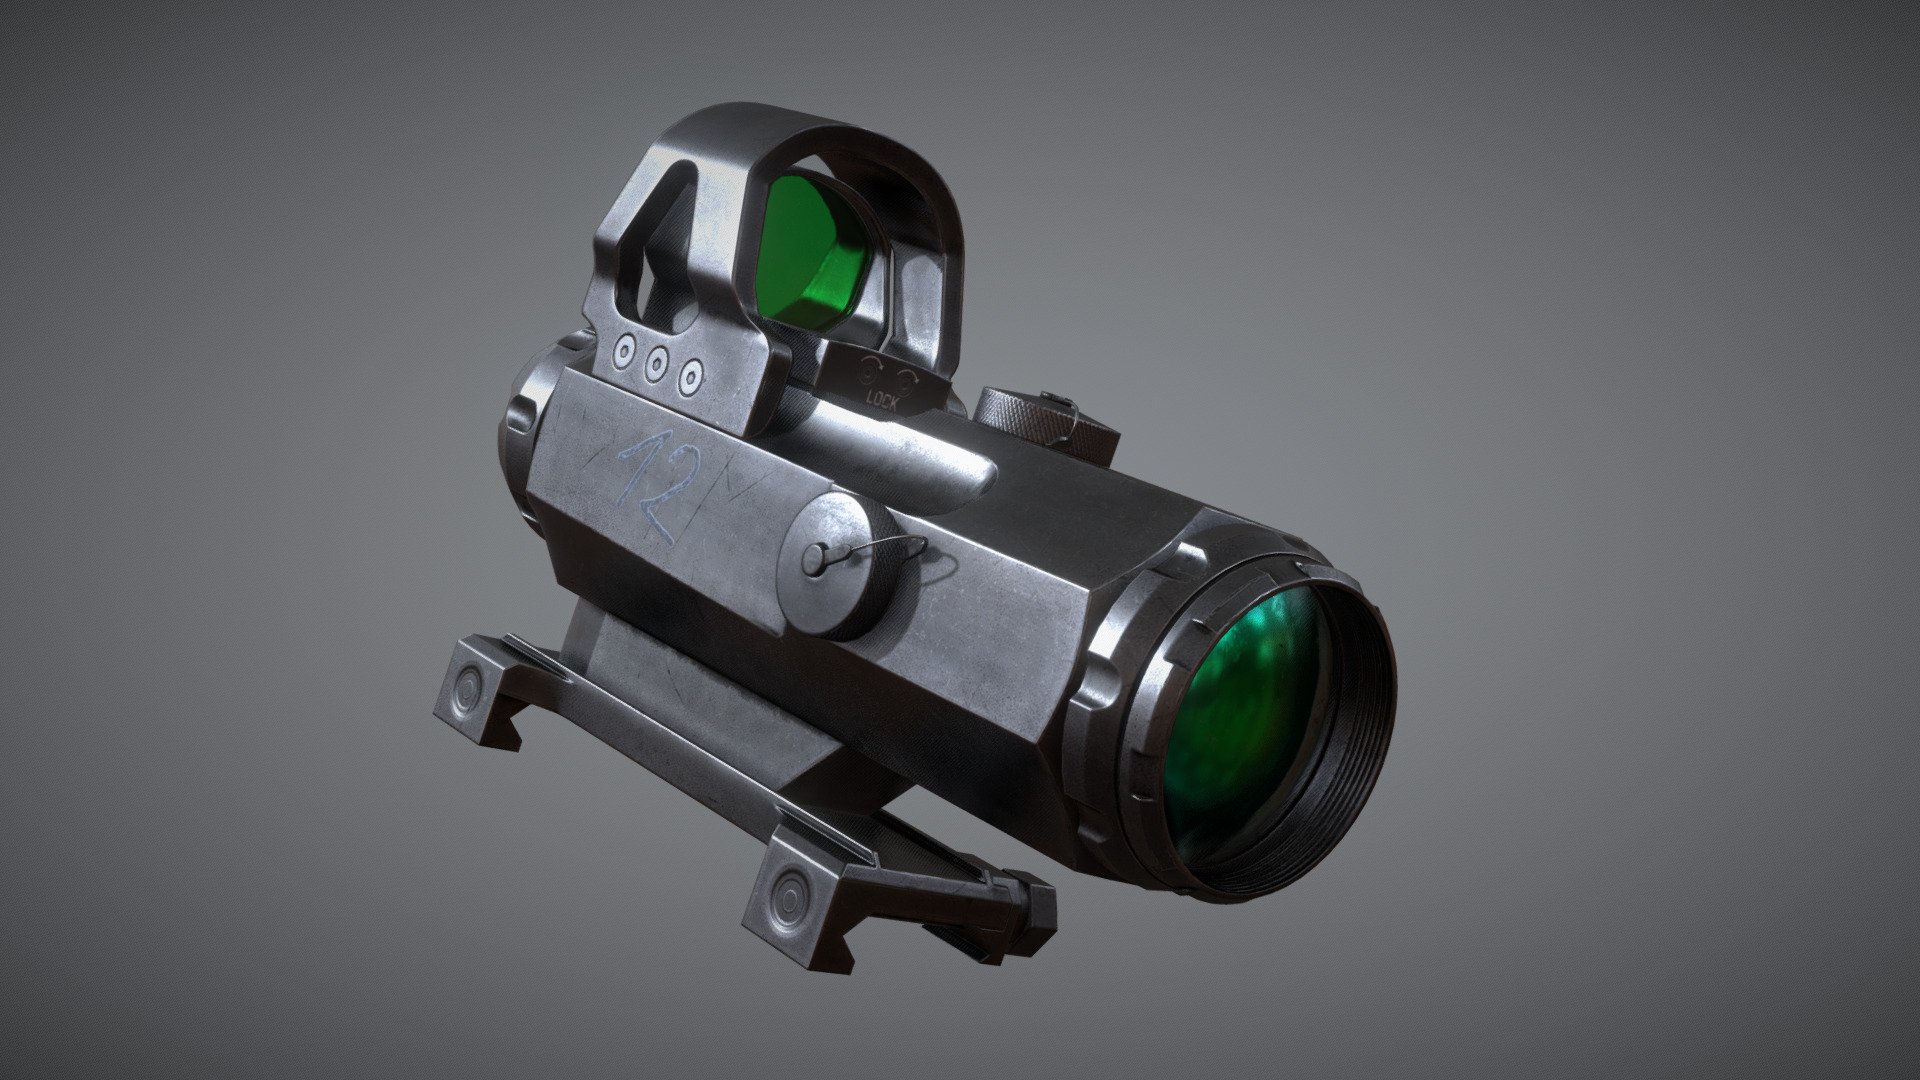 4x24mm Scope, Game Ready asset is a high quality, low poly asset originally modeled in 3DS Max 2017.

||SPECS||

Low Poly Model:

All the main objects are separately and named correctly for an easy usage.

-This Scope is designed to be modular and ready for animation. 

-Compatible  with any Picatinny rail.

|| Geometry ||

Total: 
 4.853Total Polys 
 3.257Total Verts 
 6.223 Total Tris

Model unwrapped manually to make most efficient use of the UV space.

Model scaled to approximate real world size. All materials and objects named appropriately.

|| Textures ||

Textures in .targa format: 
* 2k texture set for the Optic (Basecolor, ambient occlusion, metallic, roughness, normal,Opacity) - 4x24mm Scope Sight Game Ready FPS AAA Asset - Buy Royalty Free 3D model by Infinity_GameStudio (@Joel12) 3d model